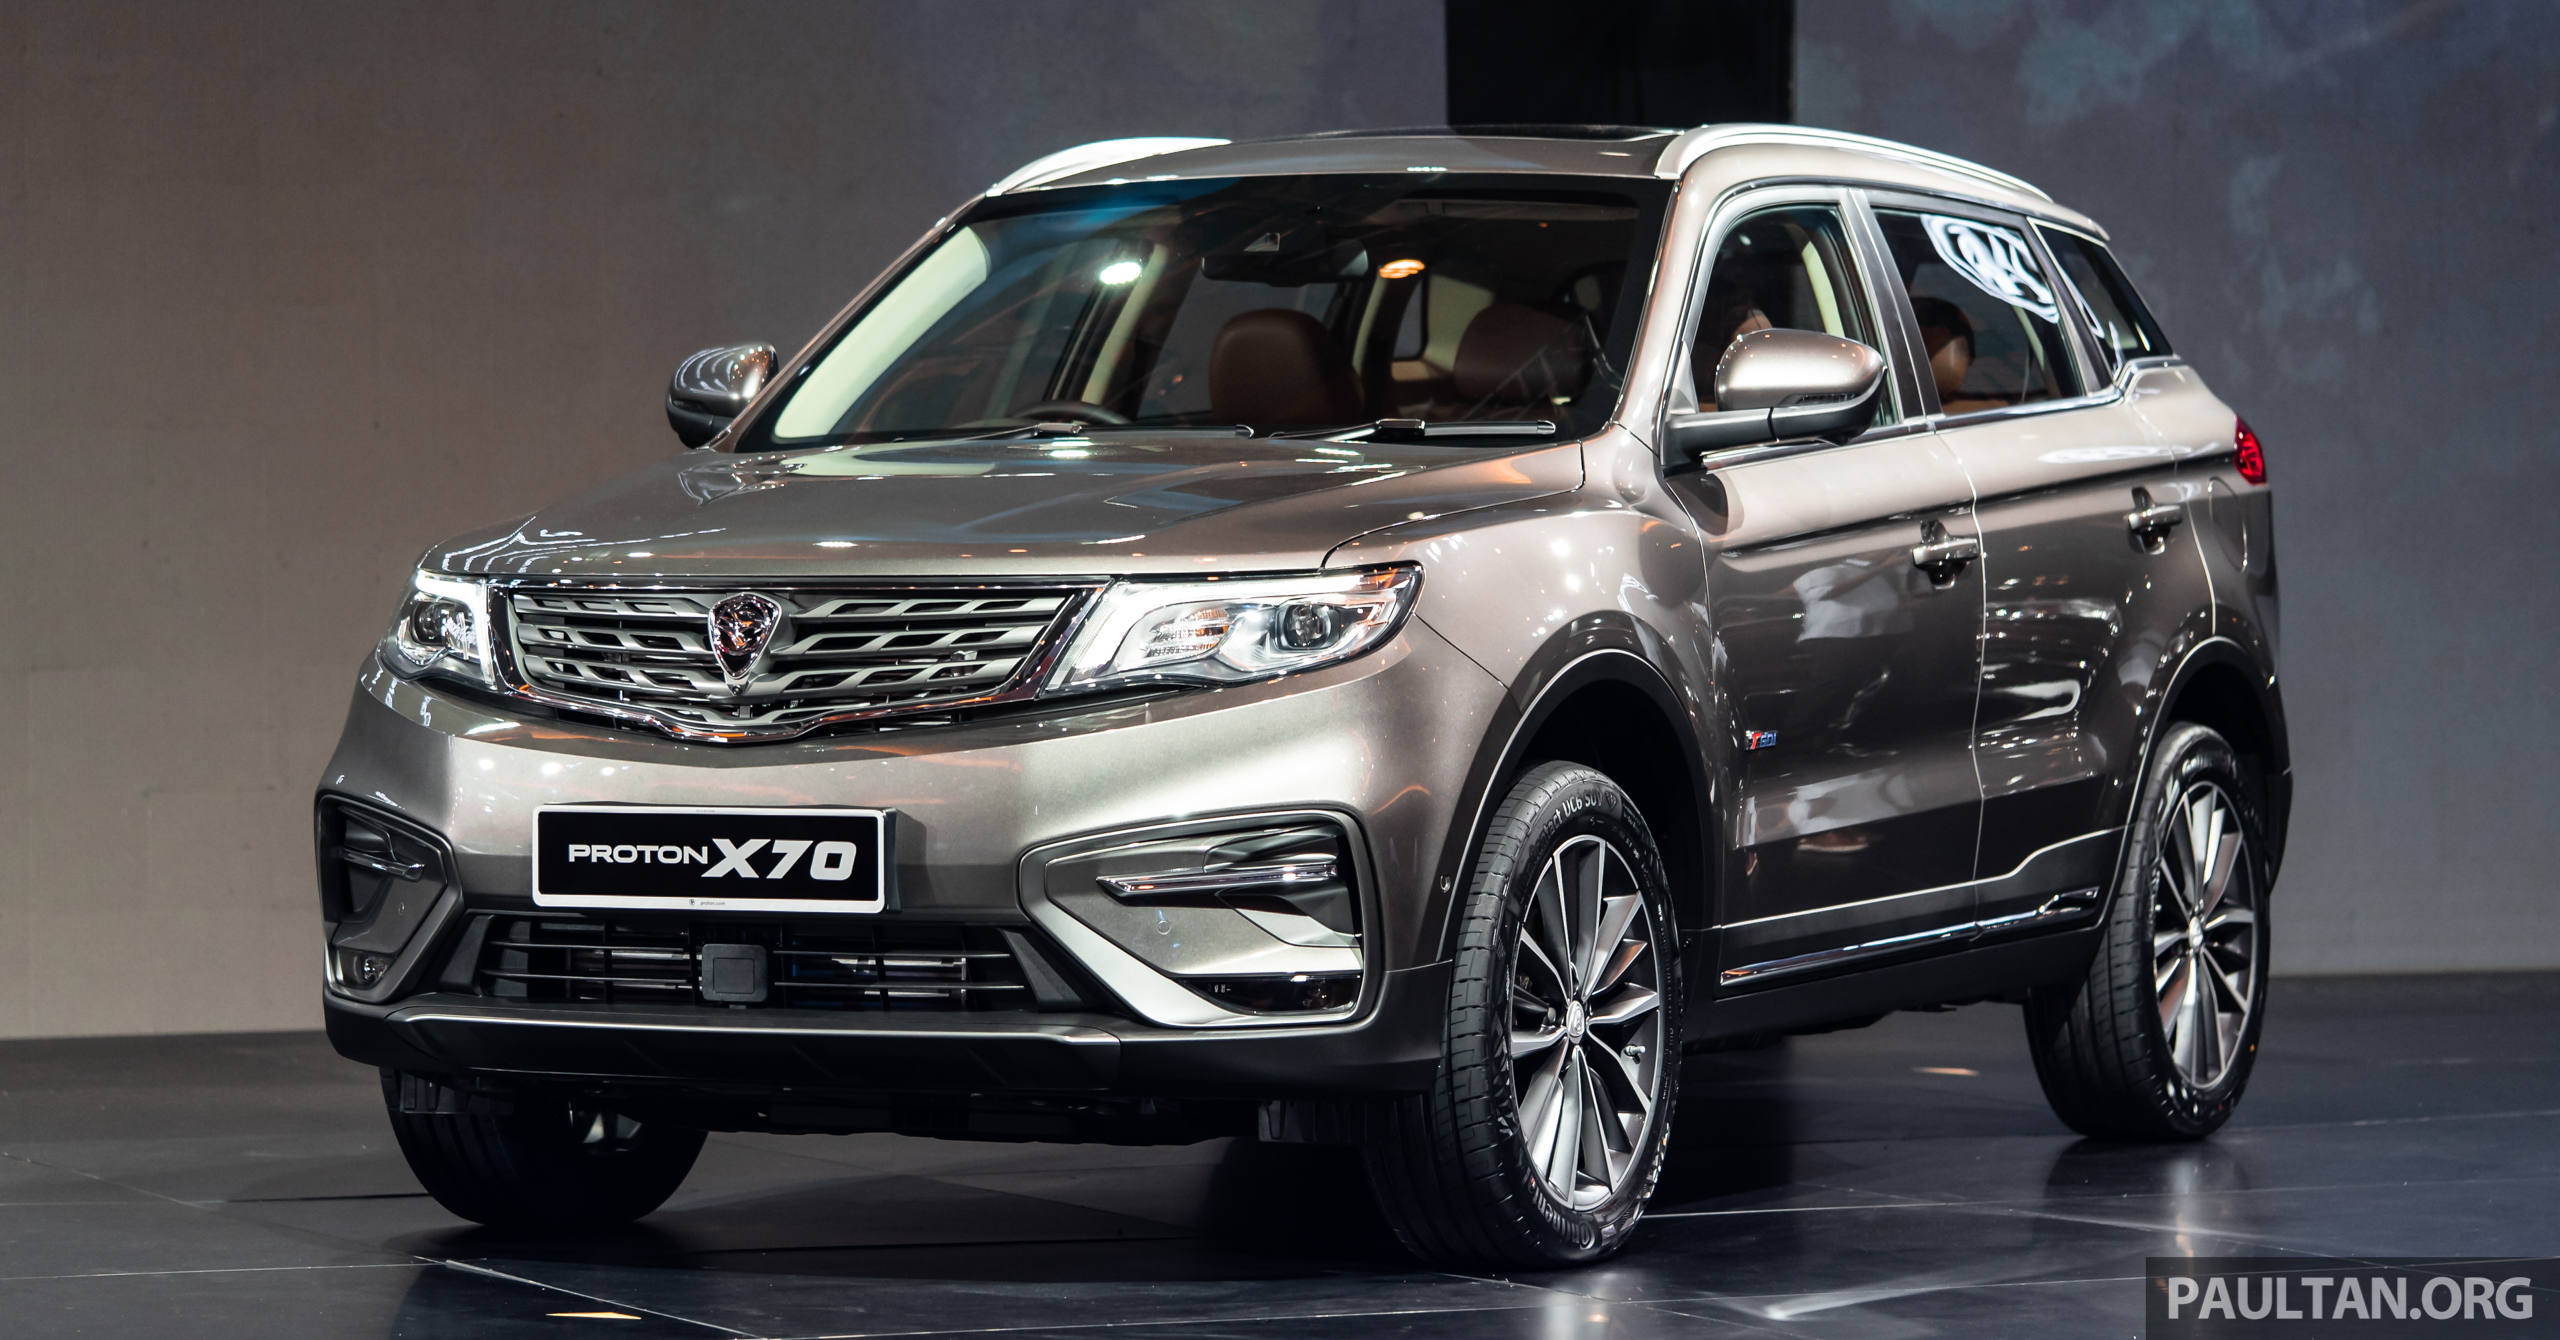 Proton X70 SUV fixed prices across Malaysia – no more extra surcharge